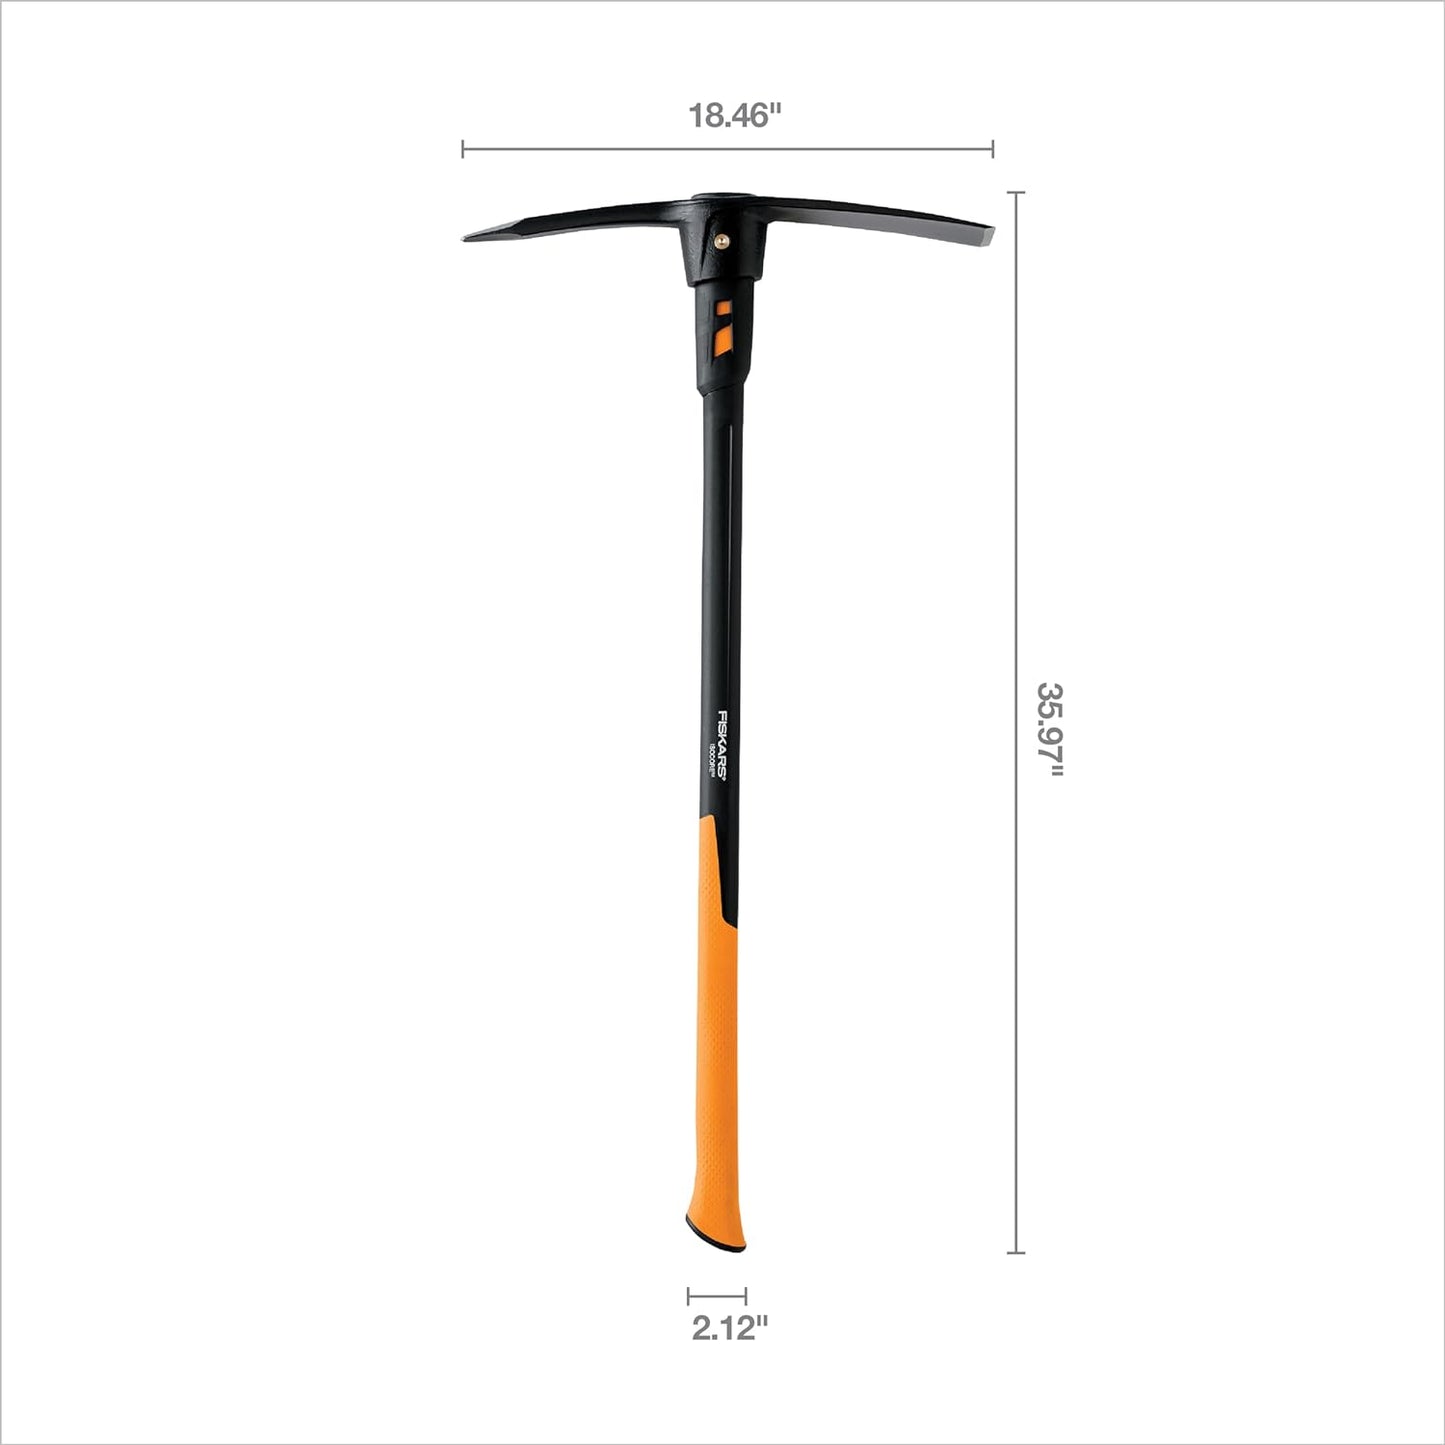 Fiskars 751210-1003 Pro IsoCore 5lb Pick-36 Dual-Ended Pickaxe Tool and Garden Hoe, No Size, Black\/Orange